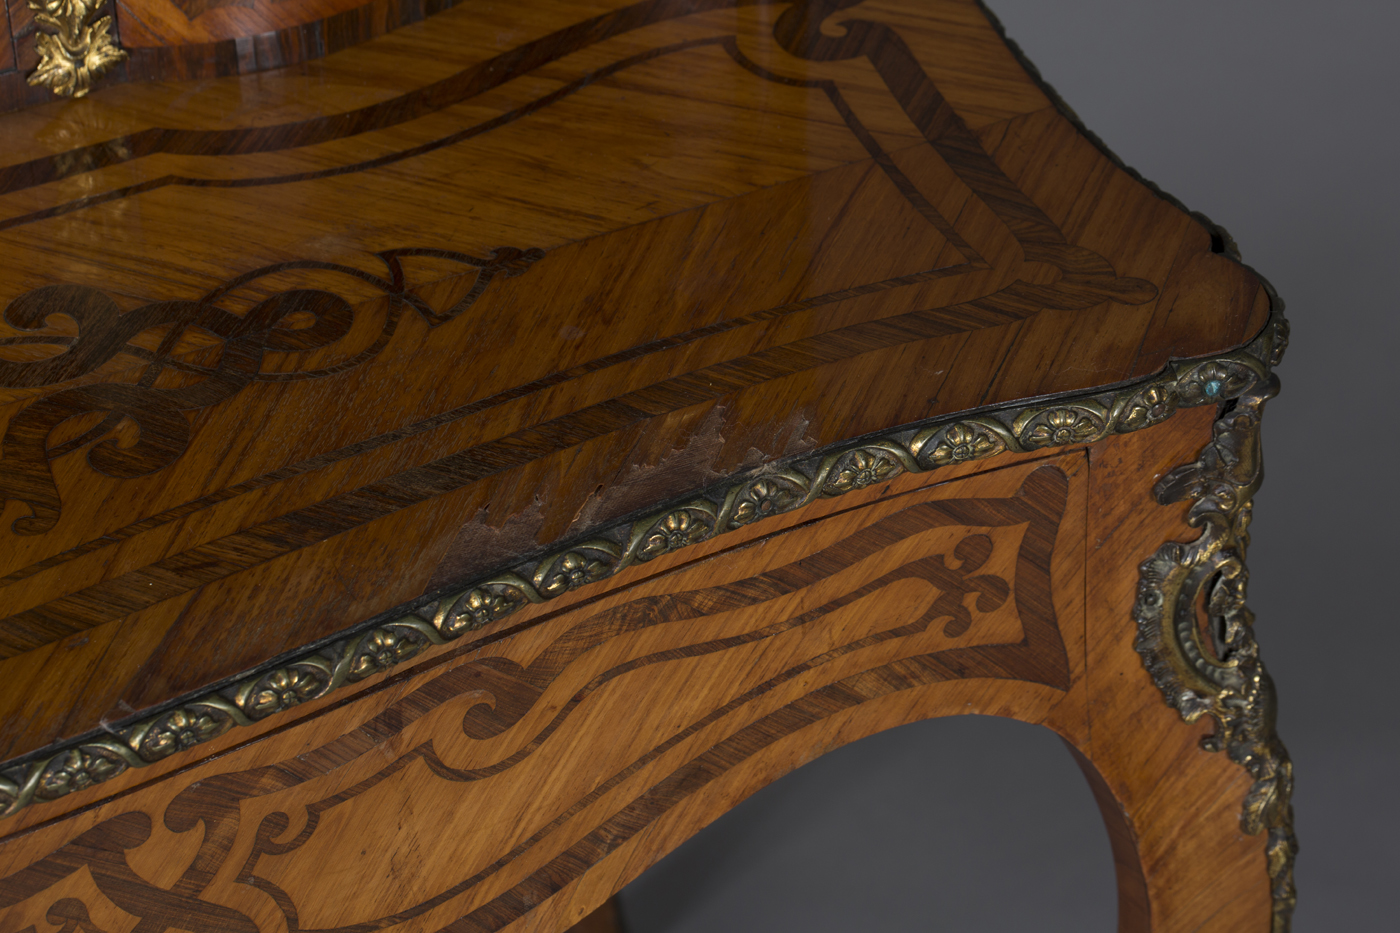 A mid-19th century Louis XV style kingwood bonheur-du-jour with rosewood banding of interwoven - Image 2 of 3